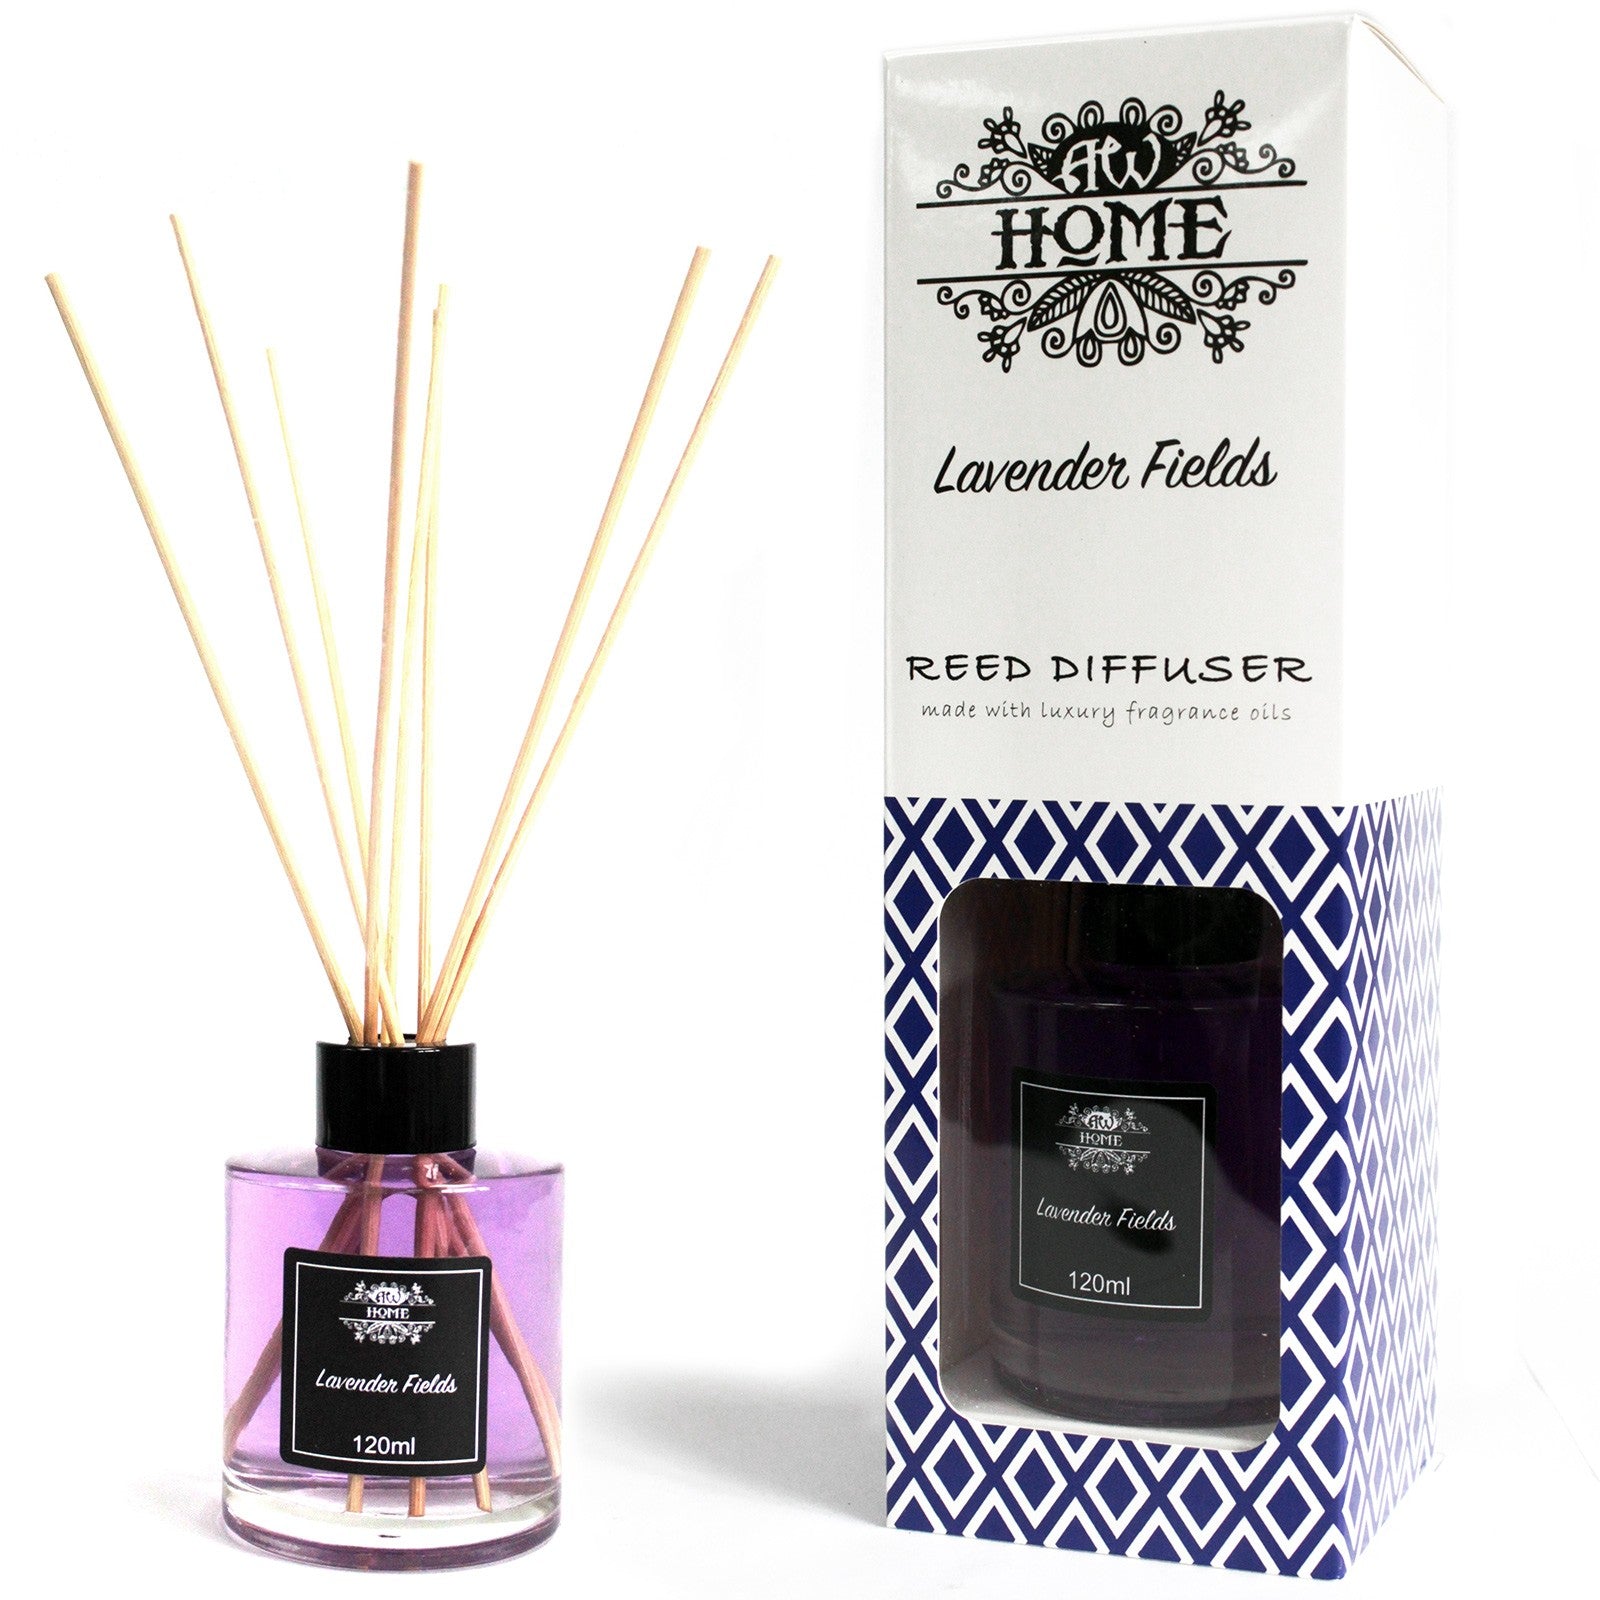 View 120ml Reed Diffuser Lavender Fields information